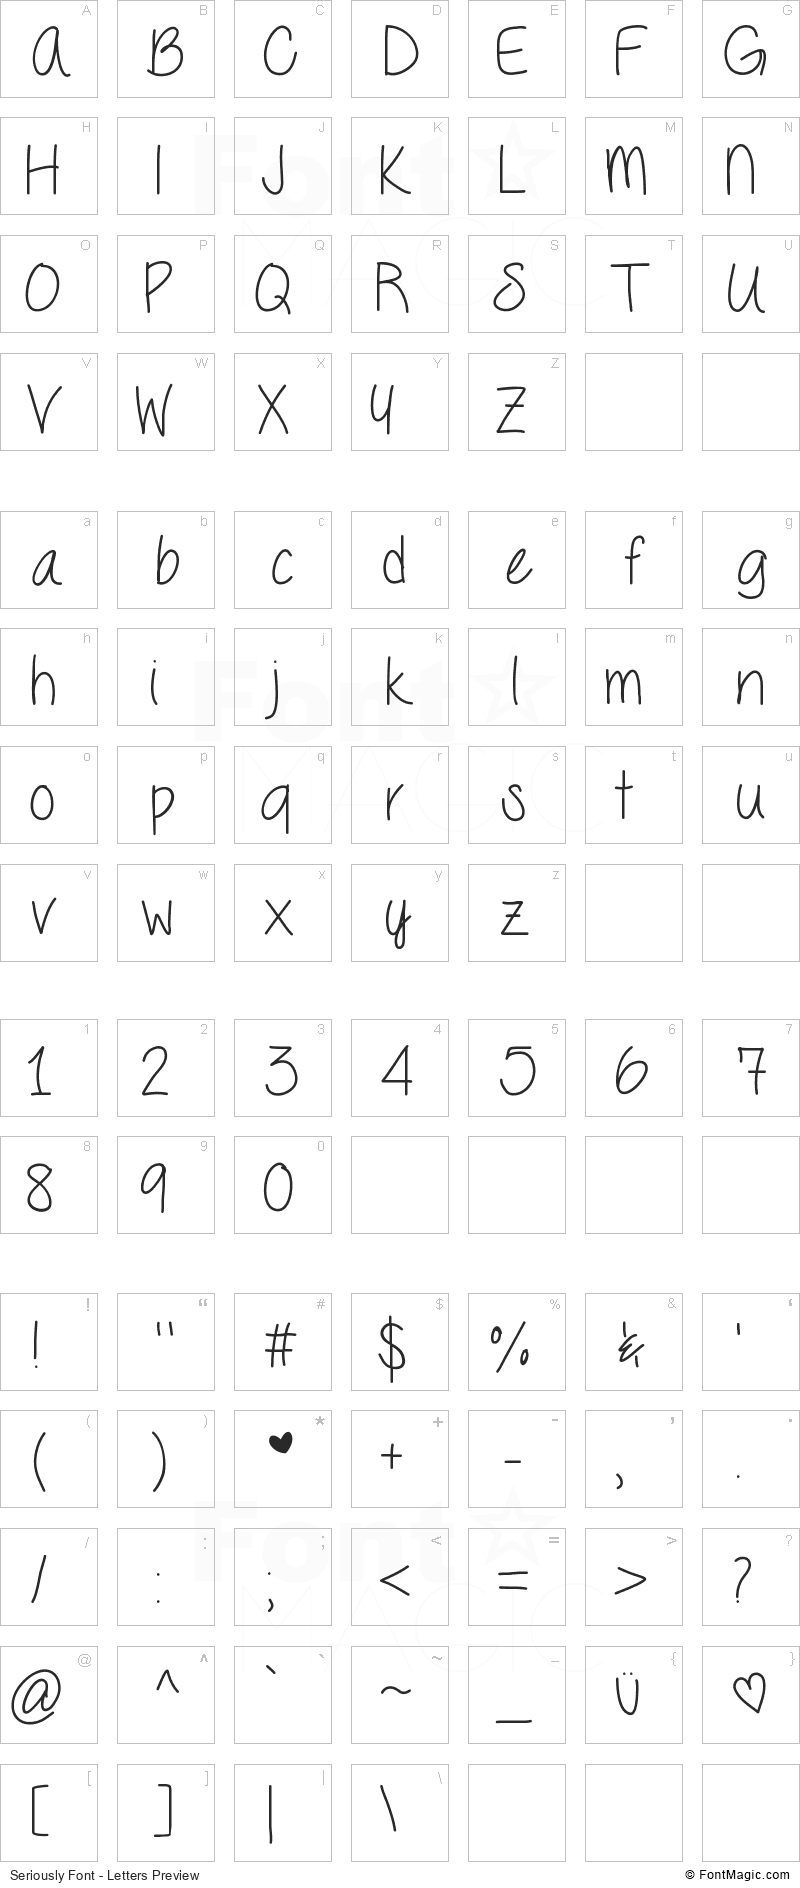 Seriously Font - All Latters Preview Chart